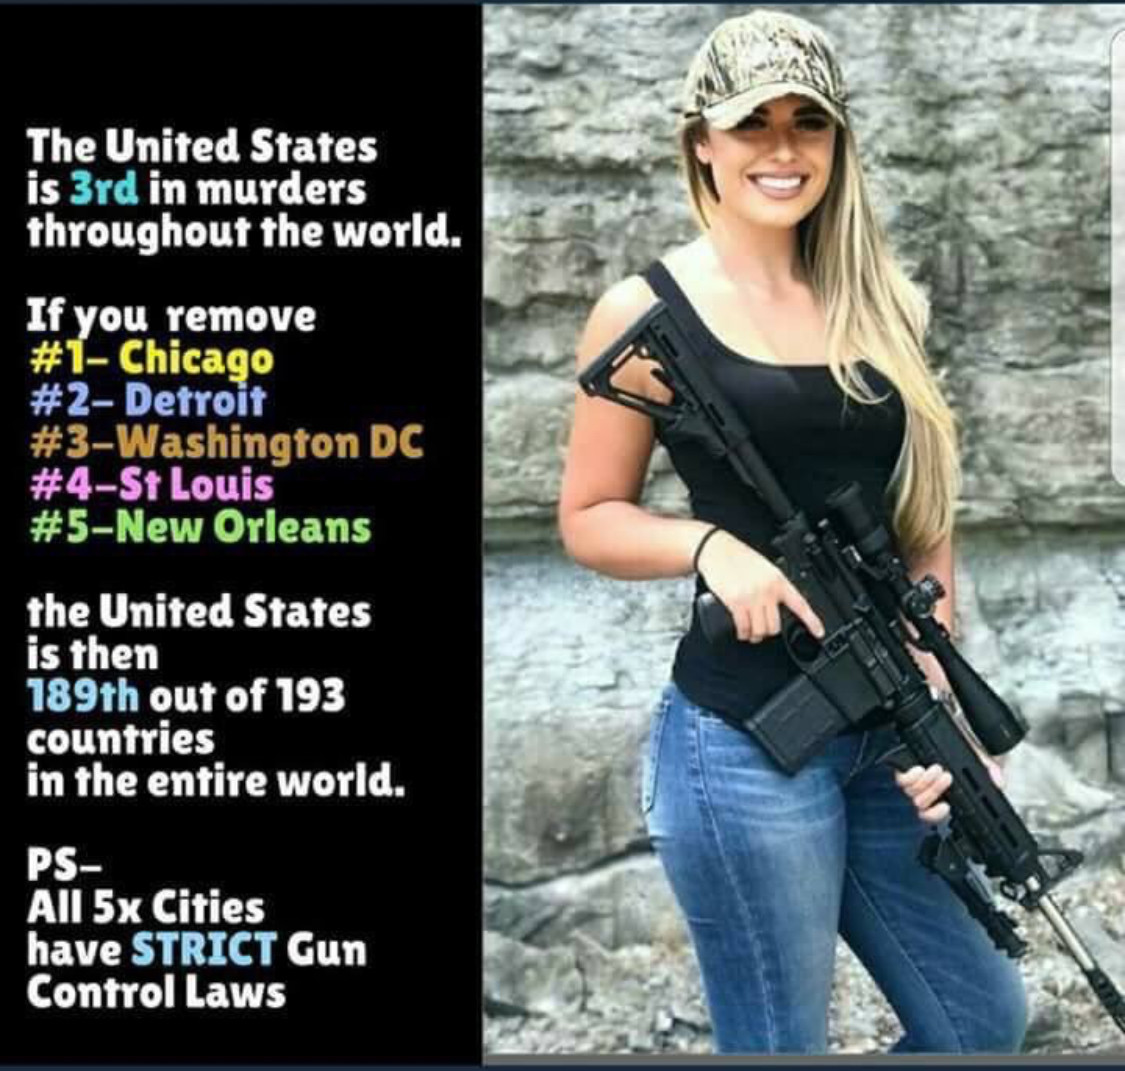 gun laws don t work - The United States is 3rd in murders throughout the world. If you remove Chicago Detroit Dc Louis Orleans the United States is then 189th out of 193 countries in the entire world. Ps All 5x Cities have Strict Gun Control Laws